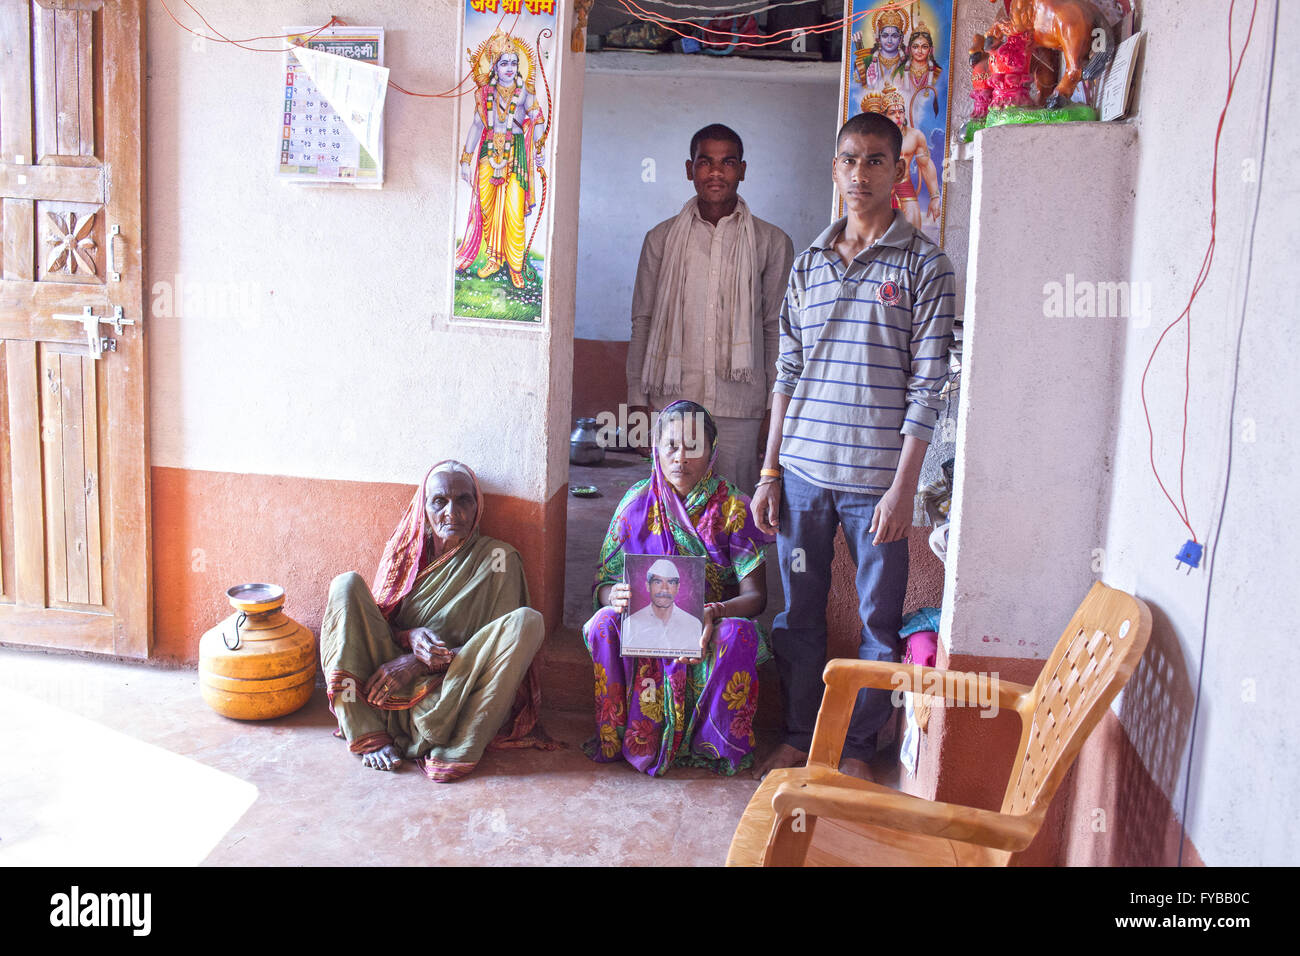 Latur, Maharashtra. 21st Apr, 2016. 21 April 2016 - Gategaon, Latur - INDIA.Kamalbai with a picture of her farmer husband Mahakant Mali, 55, who committed suicide by hanging himself from a dried Mango tree. Mahakant's two sons & mother. © Subhash Sharma/ZUMA Wire/Alamy Live News Stock Photo